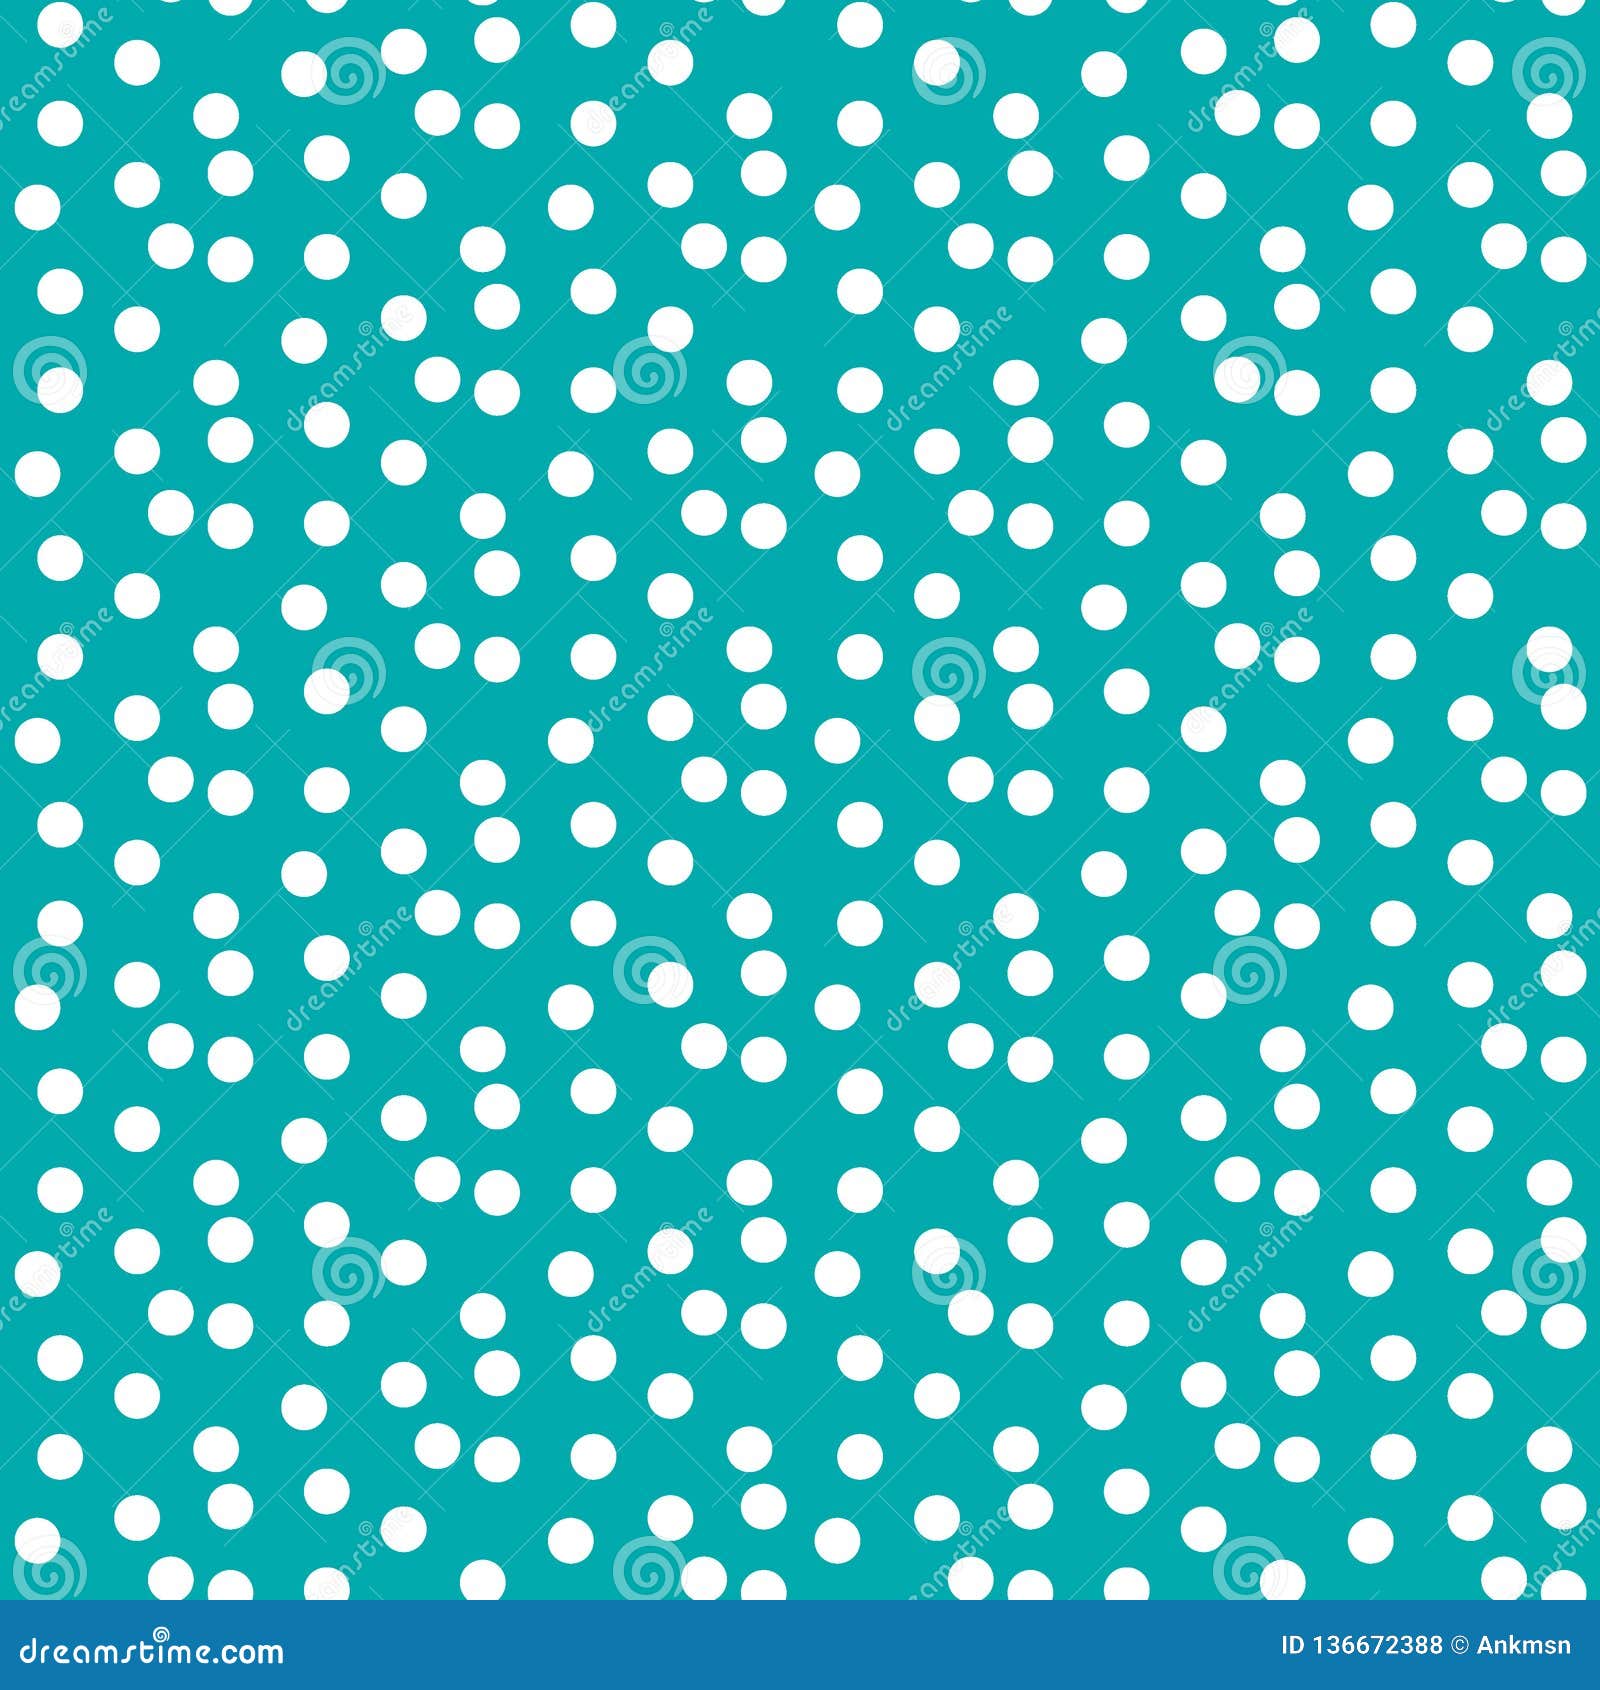 Turquoise Background Random Scattered Circle Dots Seamless Pattern ...